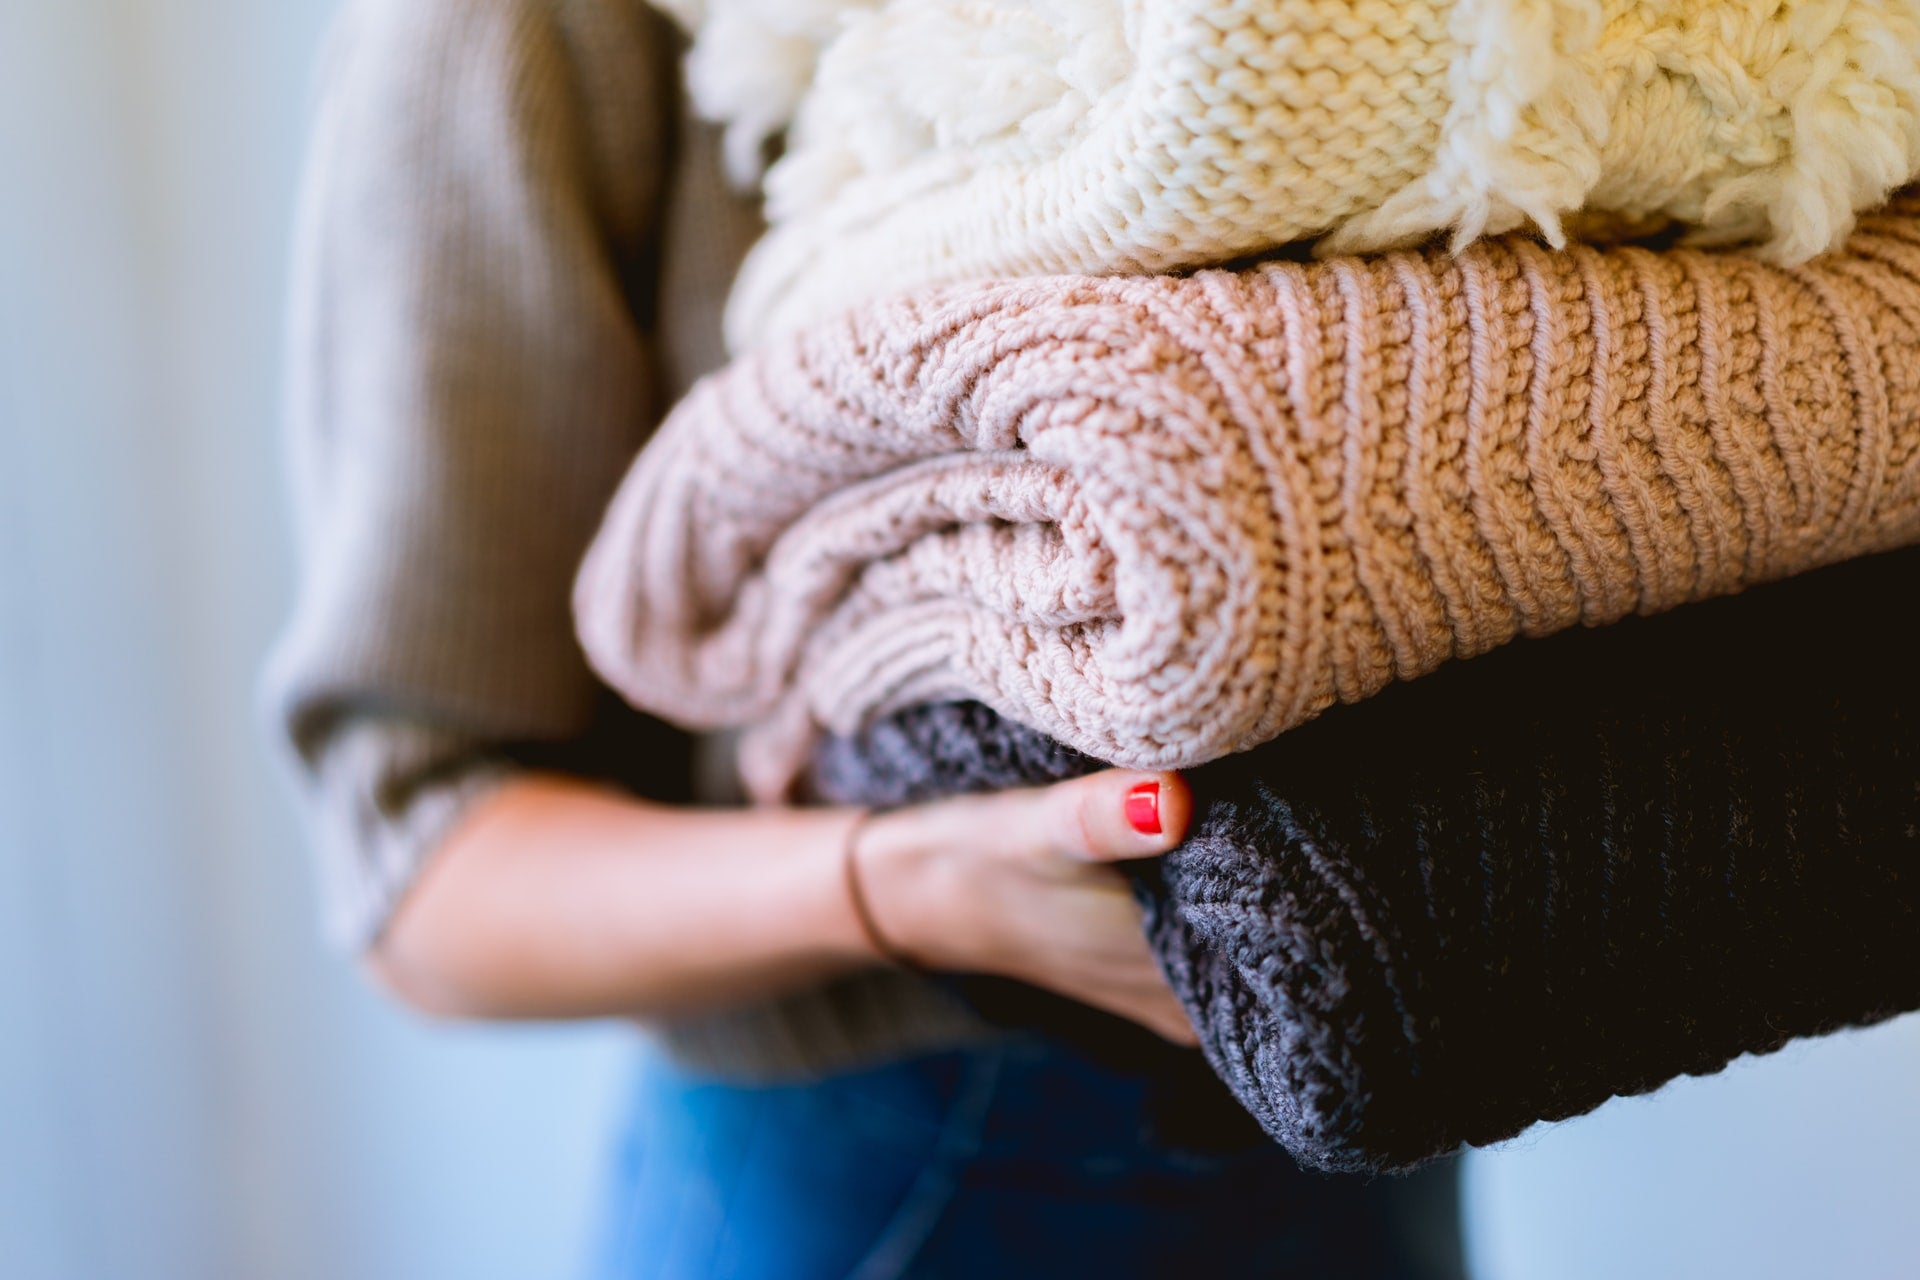 A woman carrying knit sweaters, doing laundry as chores are one of the nicest gifts for people with anxiety.